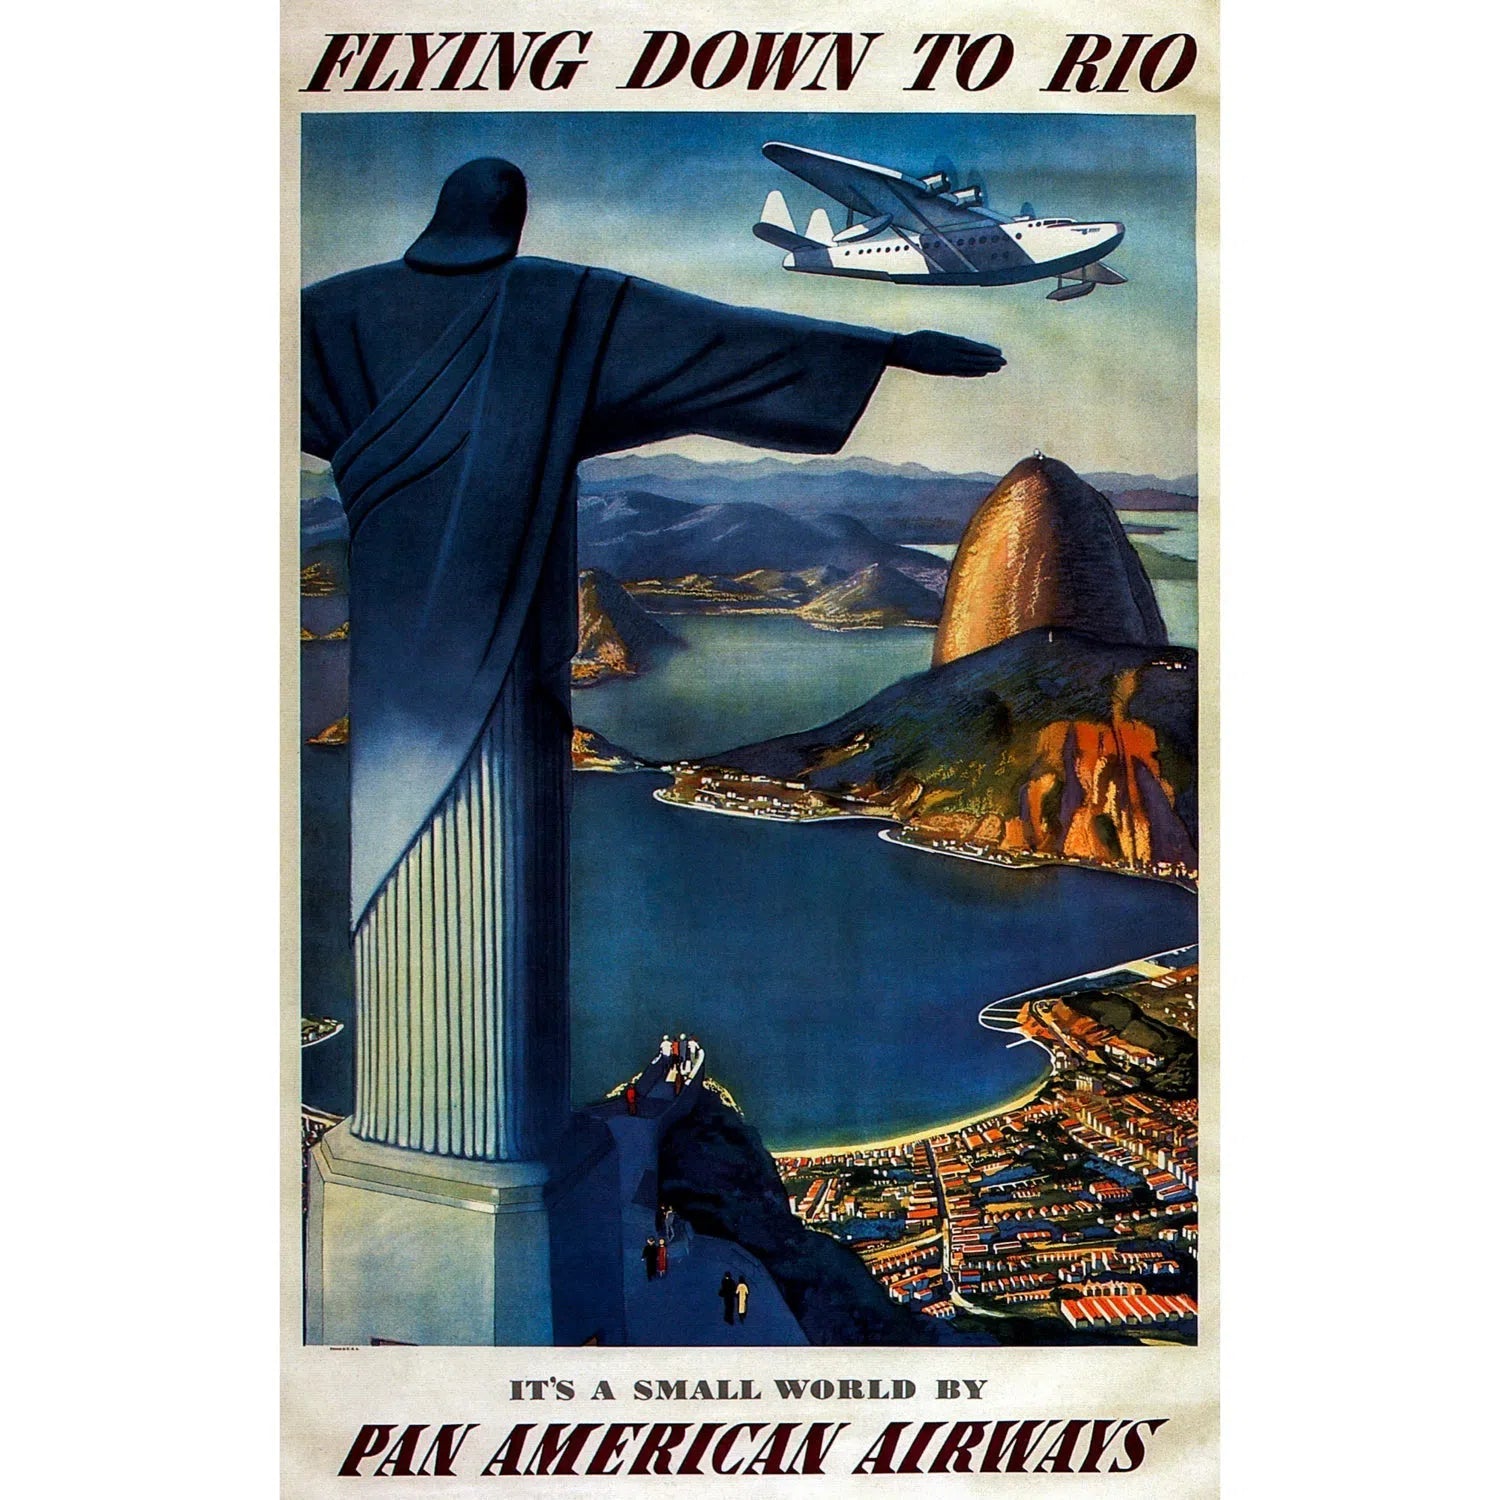 Flying down to Rio - Pan American Airways-Imagesdartistes